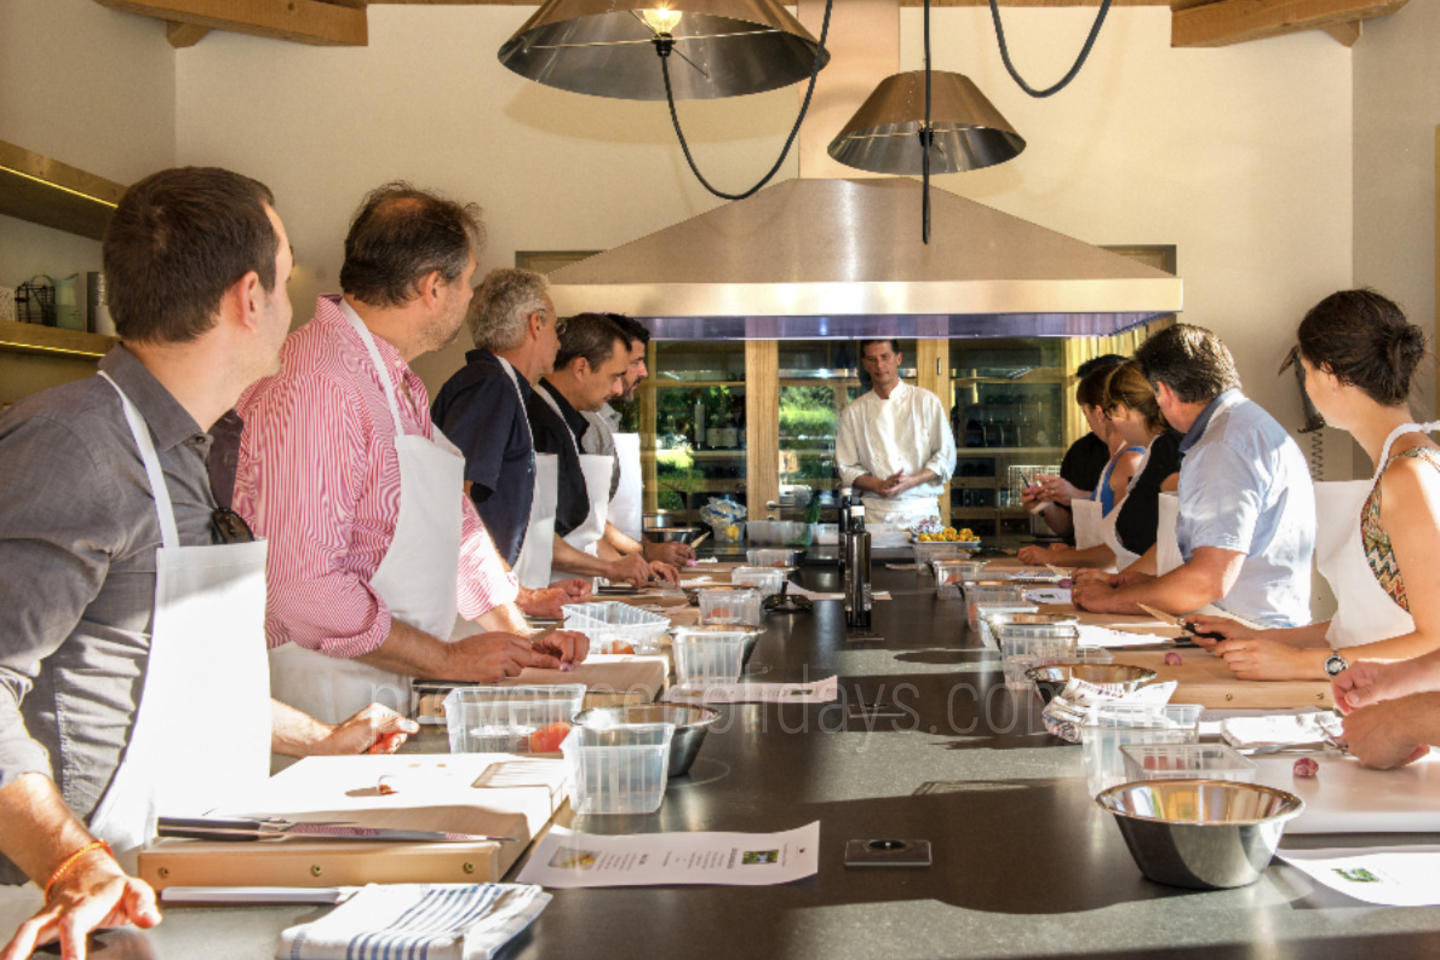 Cookery classes at the Château de Massillan Cookery classes at the Château de Massillan - -1